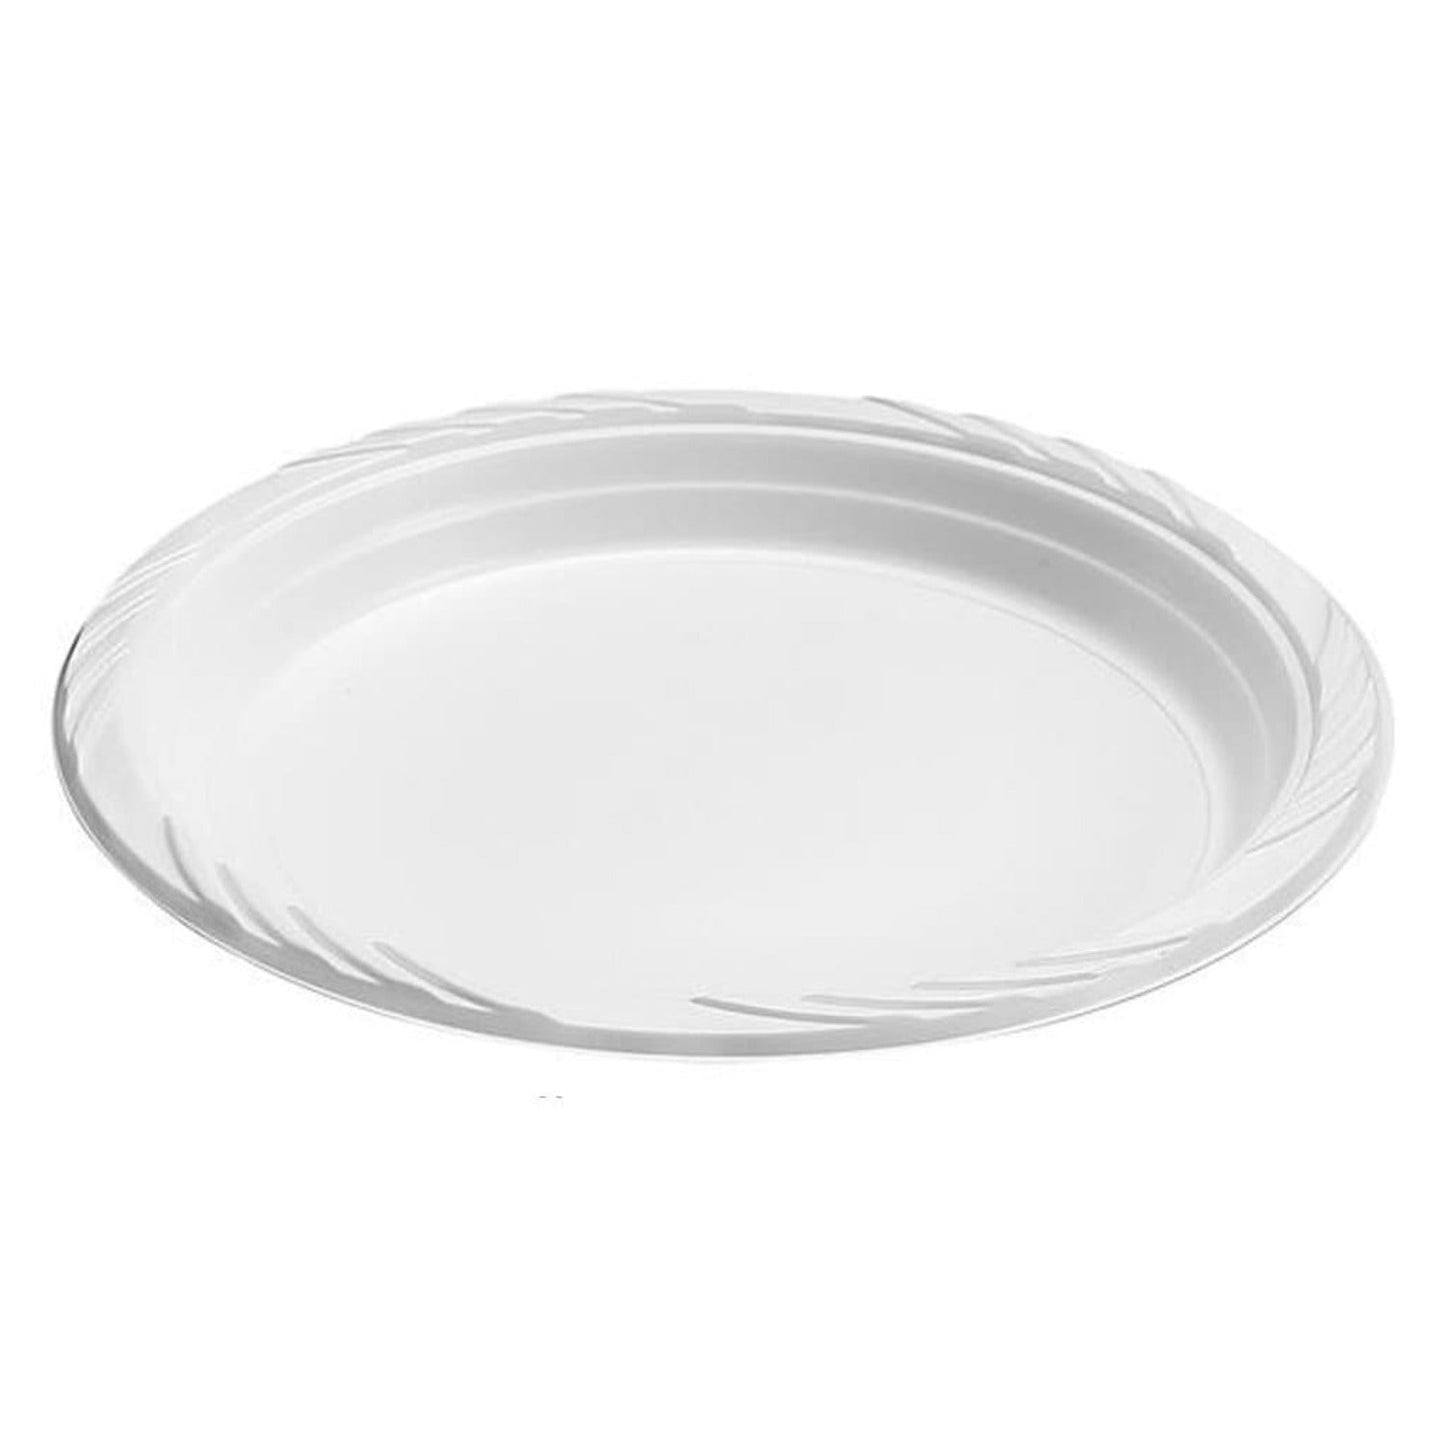 Exquisite White Paper Plates 9 Inch Disposable Plates - 100 Ct. : Target